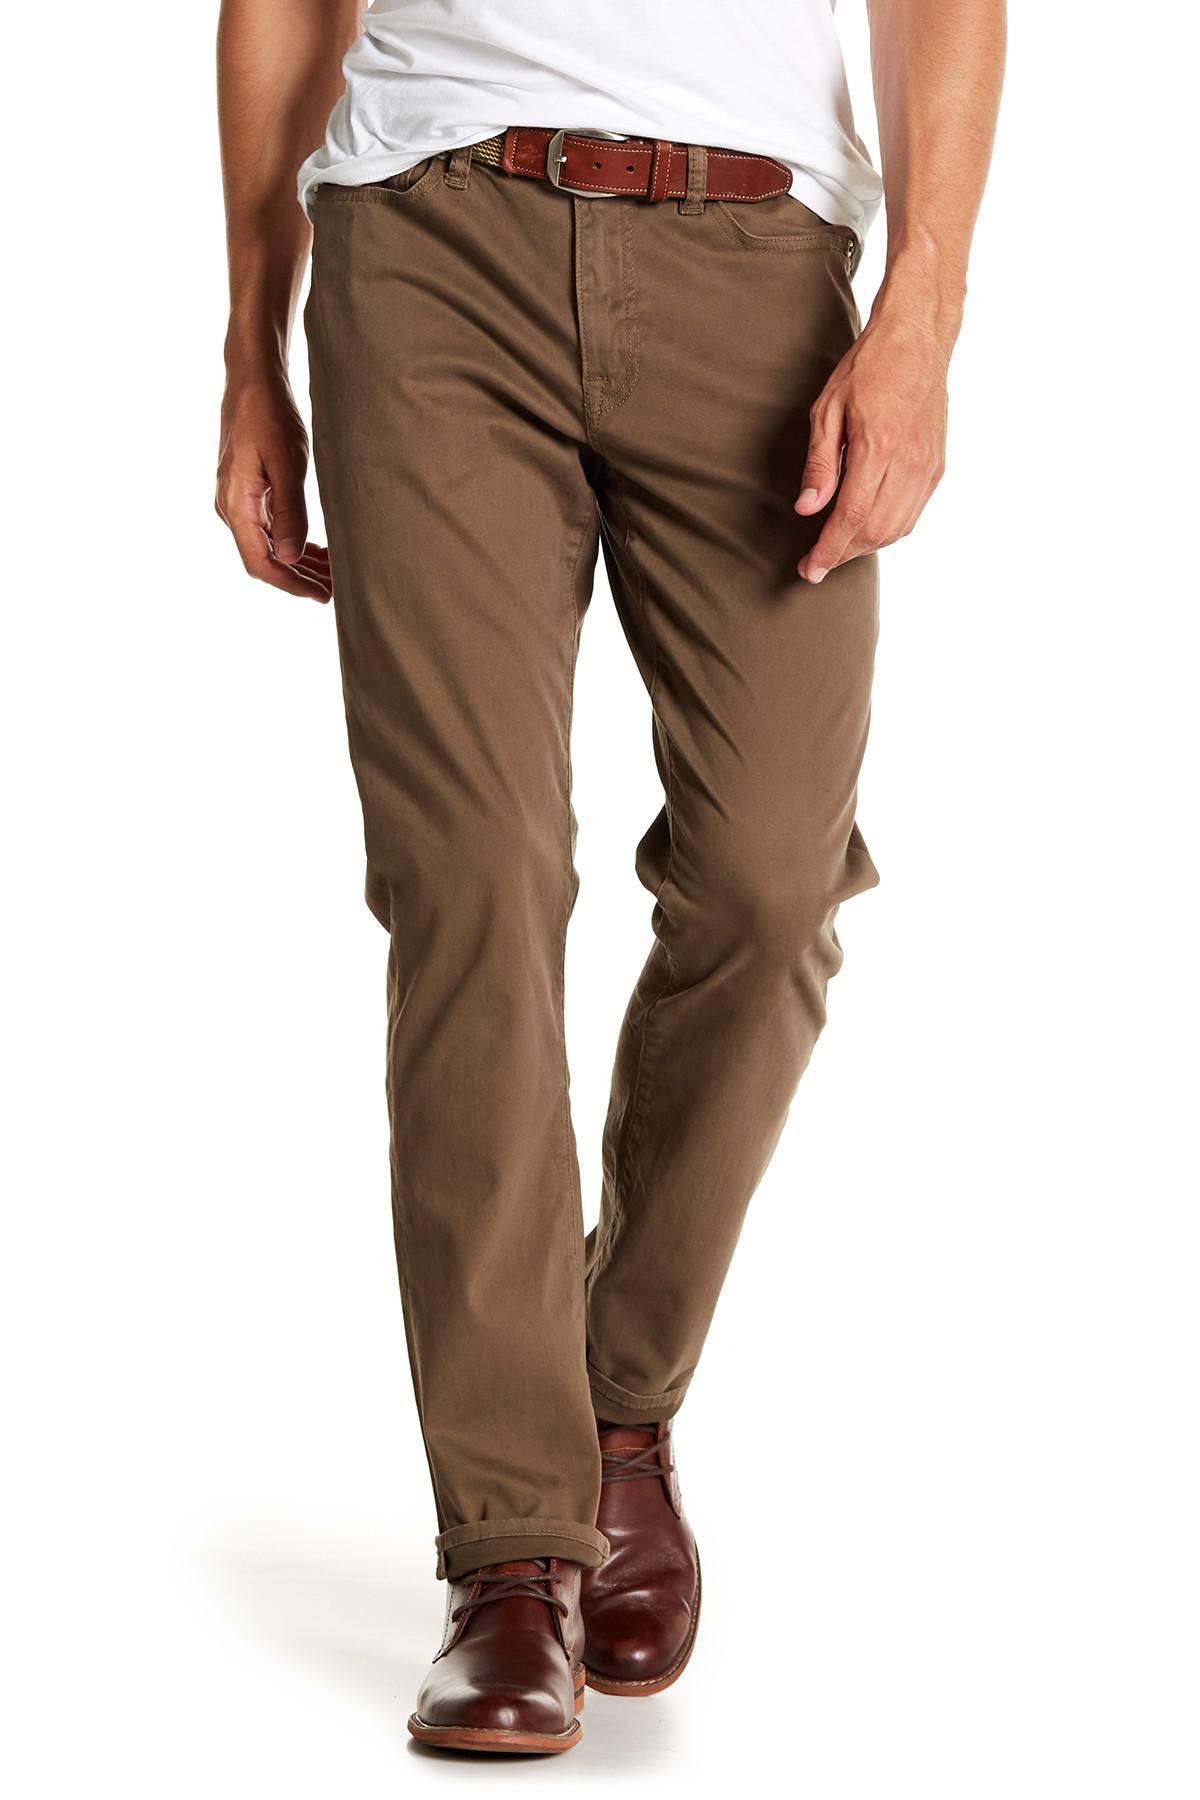 Lucky Brand 410 Athletic Slim Pants - 30-32 Inseam in Brown for